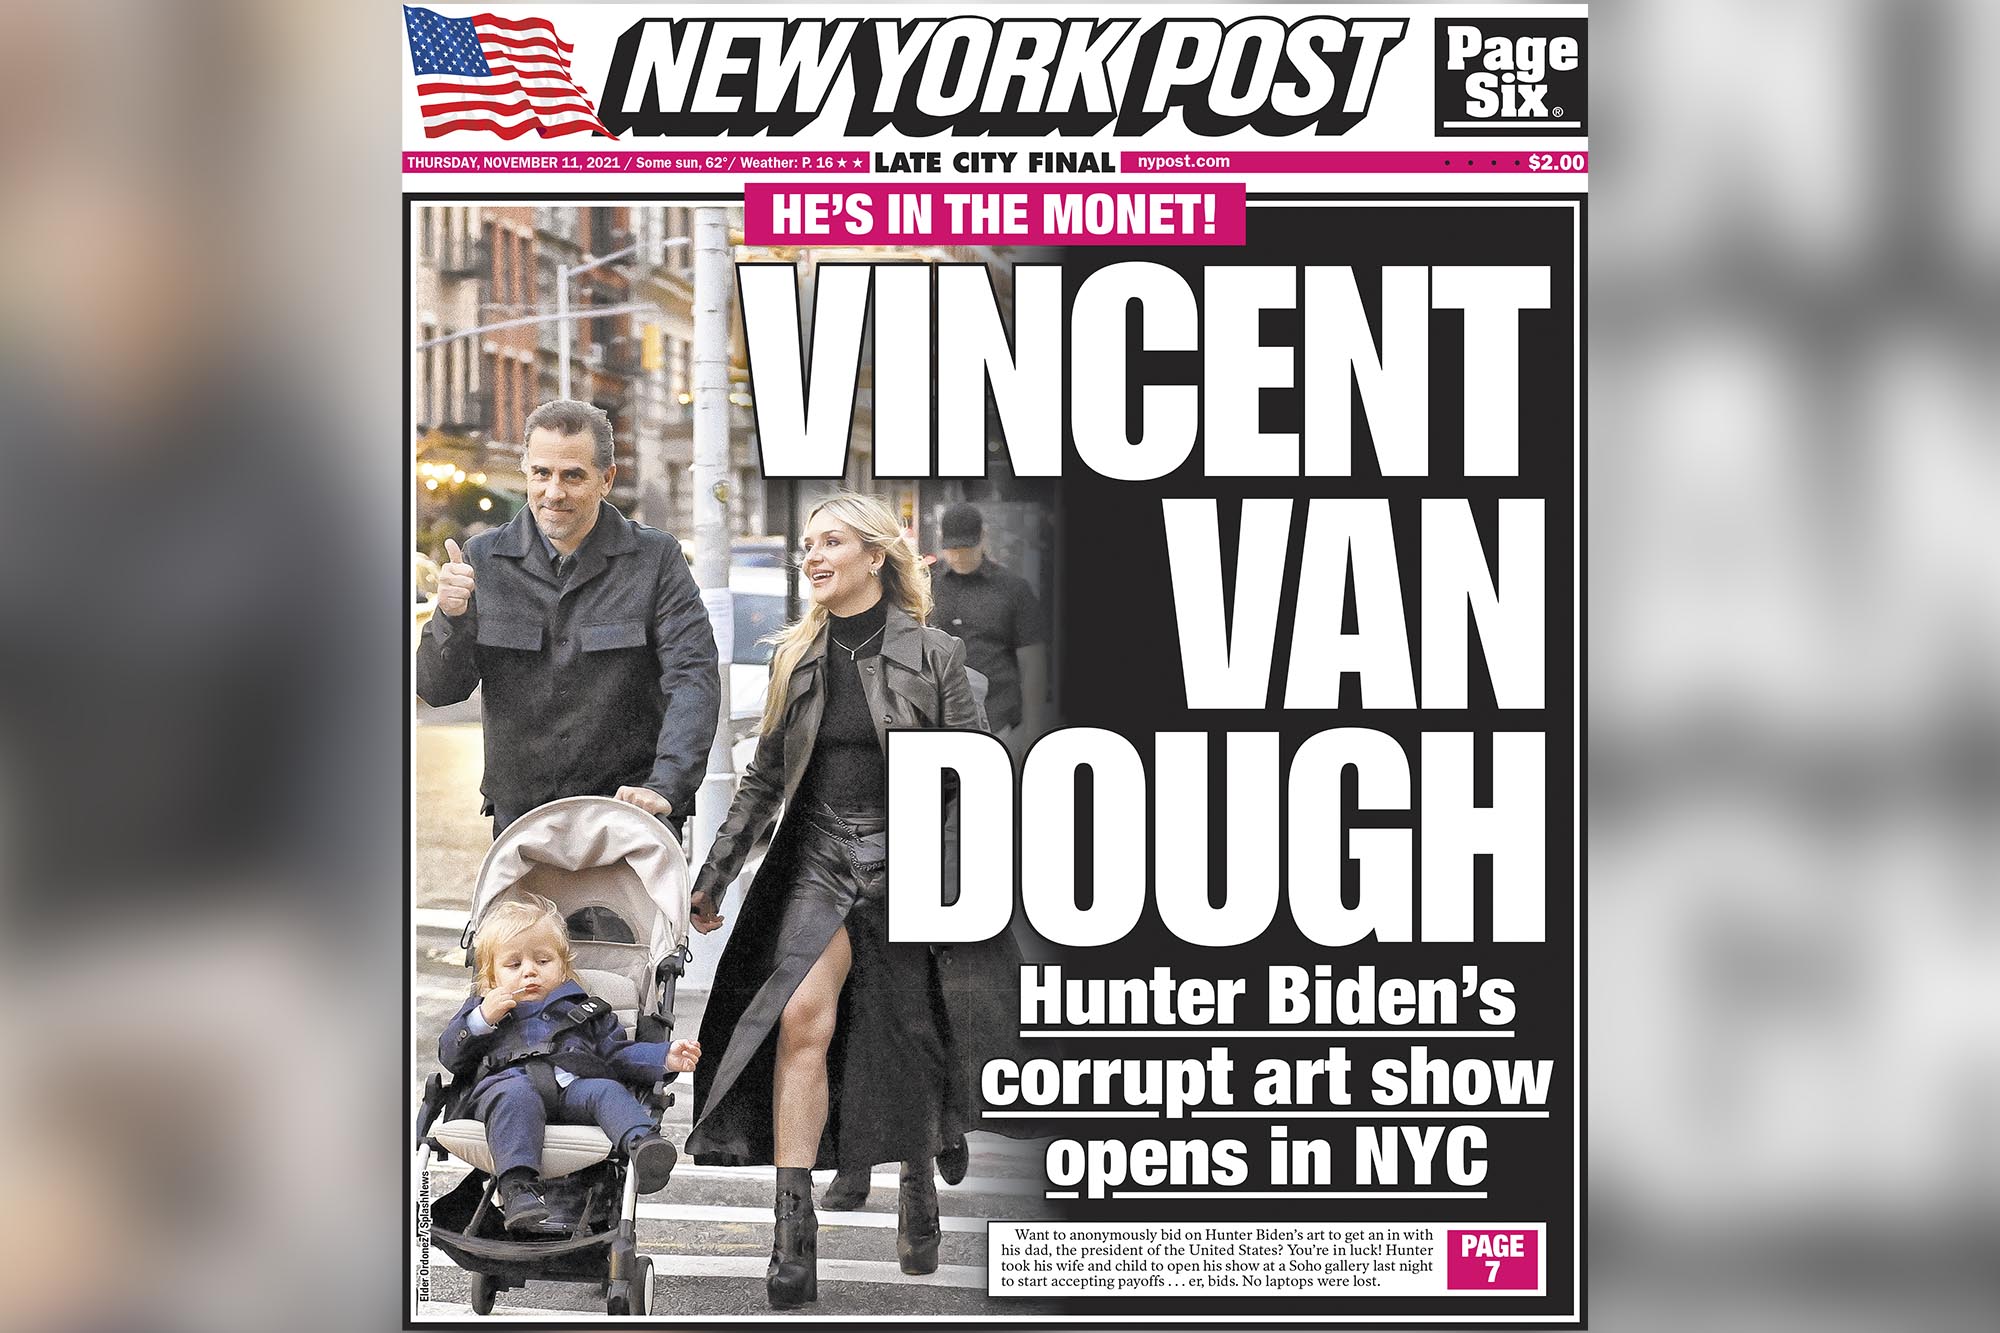 New York Post cover for Thursday, November 11, 2021. Front Page. He's in the Monet! Vincent Van Dough. Hunter Biden's corrupt art show opens in NYC.